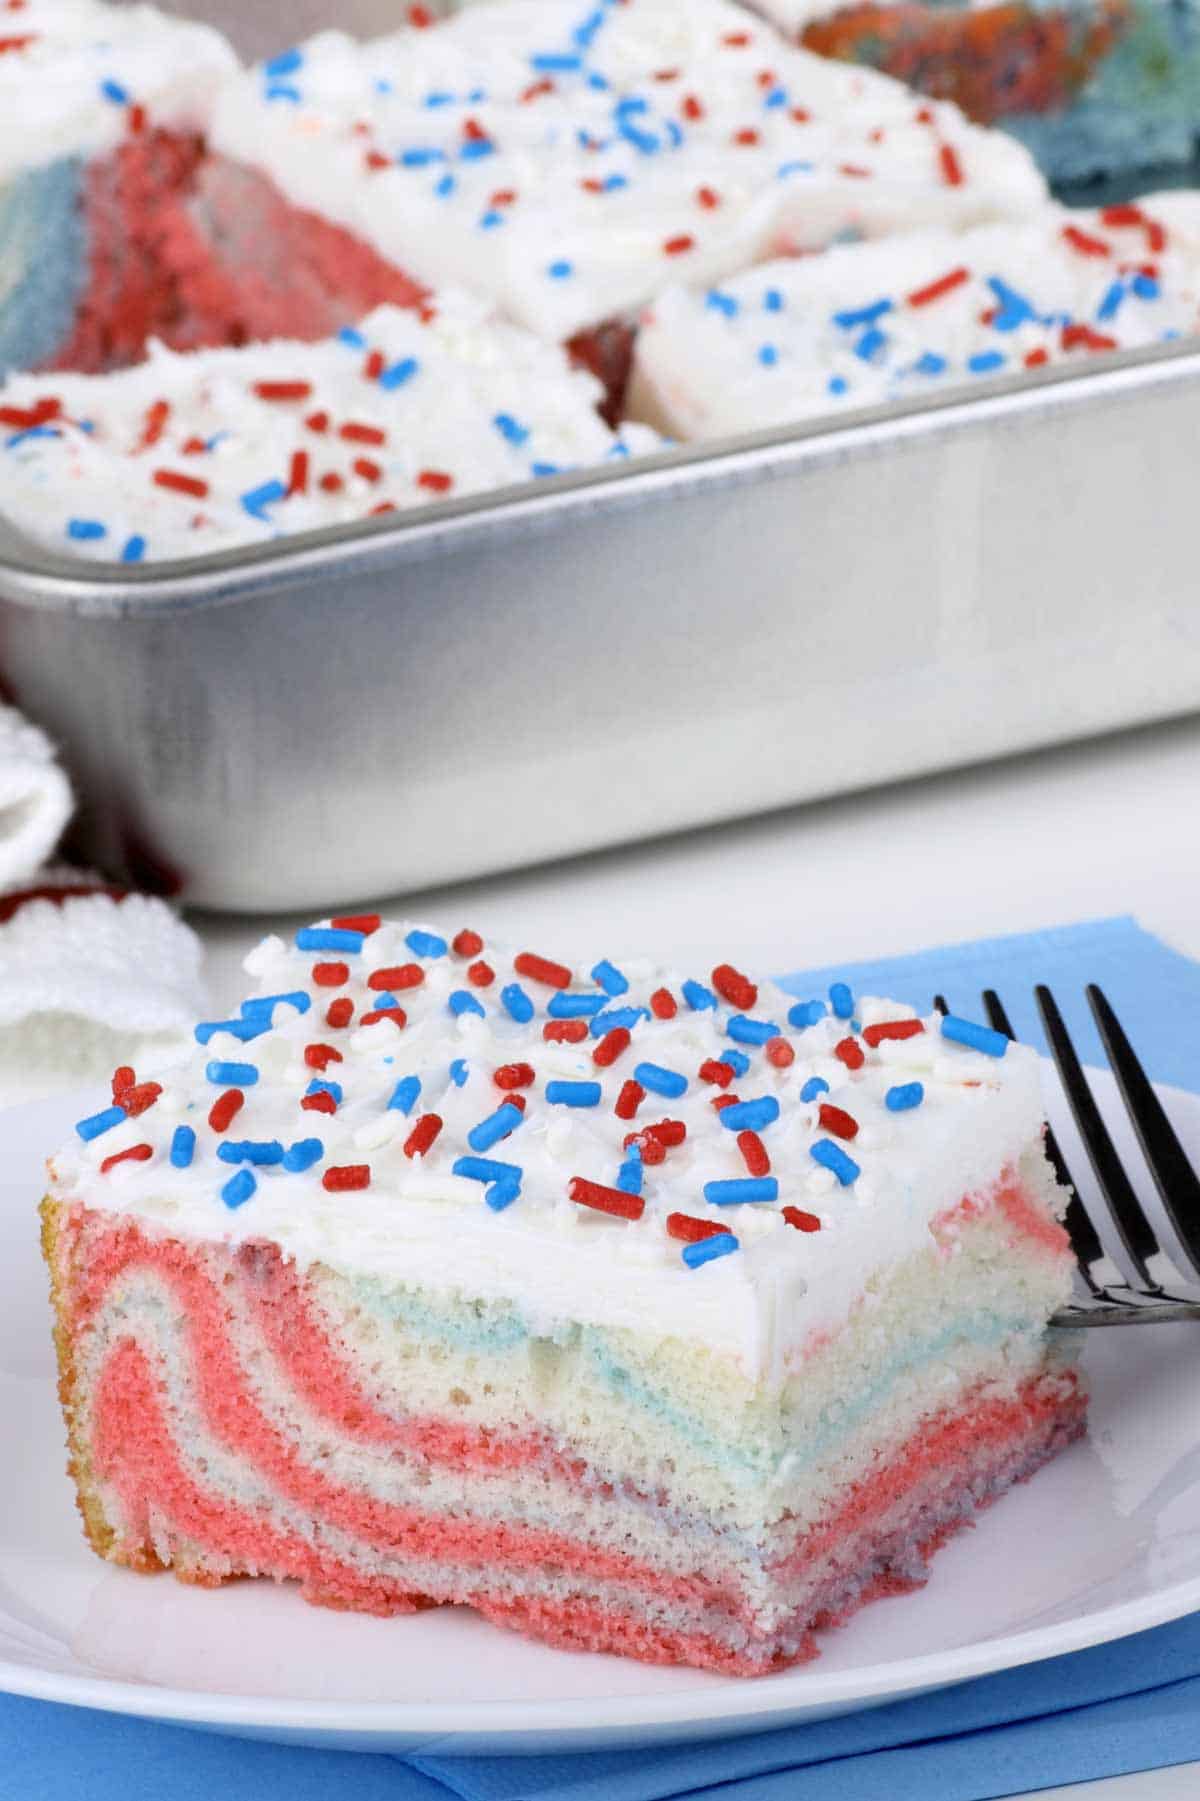 Cut slice of sheet cake on a plate. The minimalist cake design features a white frosting and red, white, and blue jimmie sprinkles